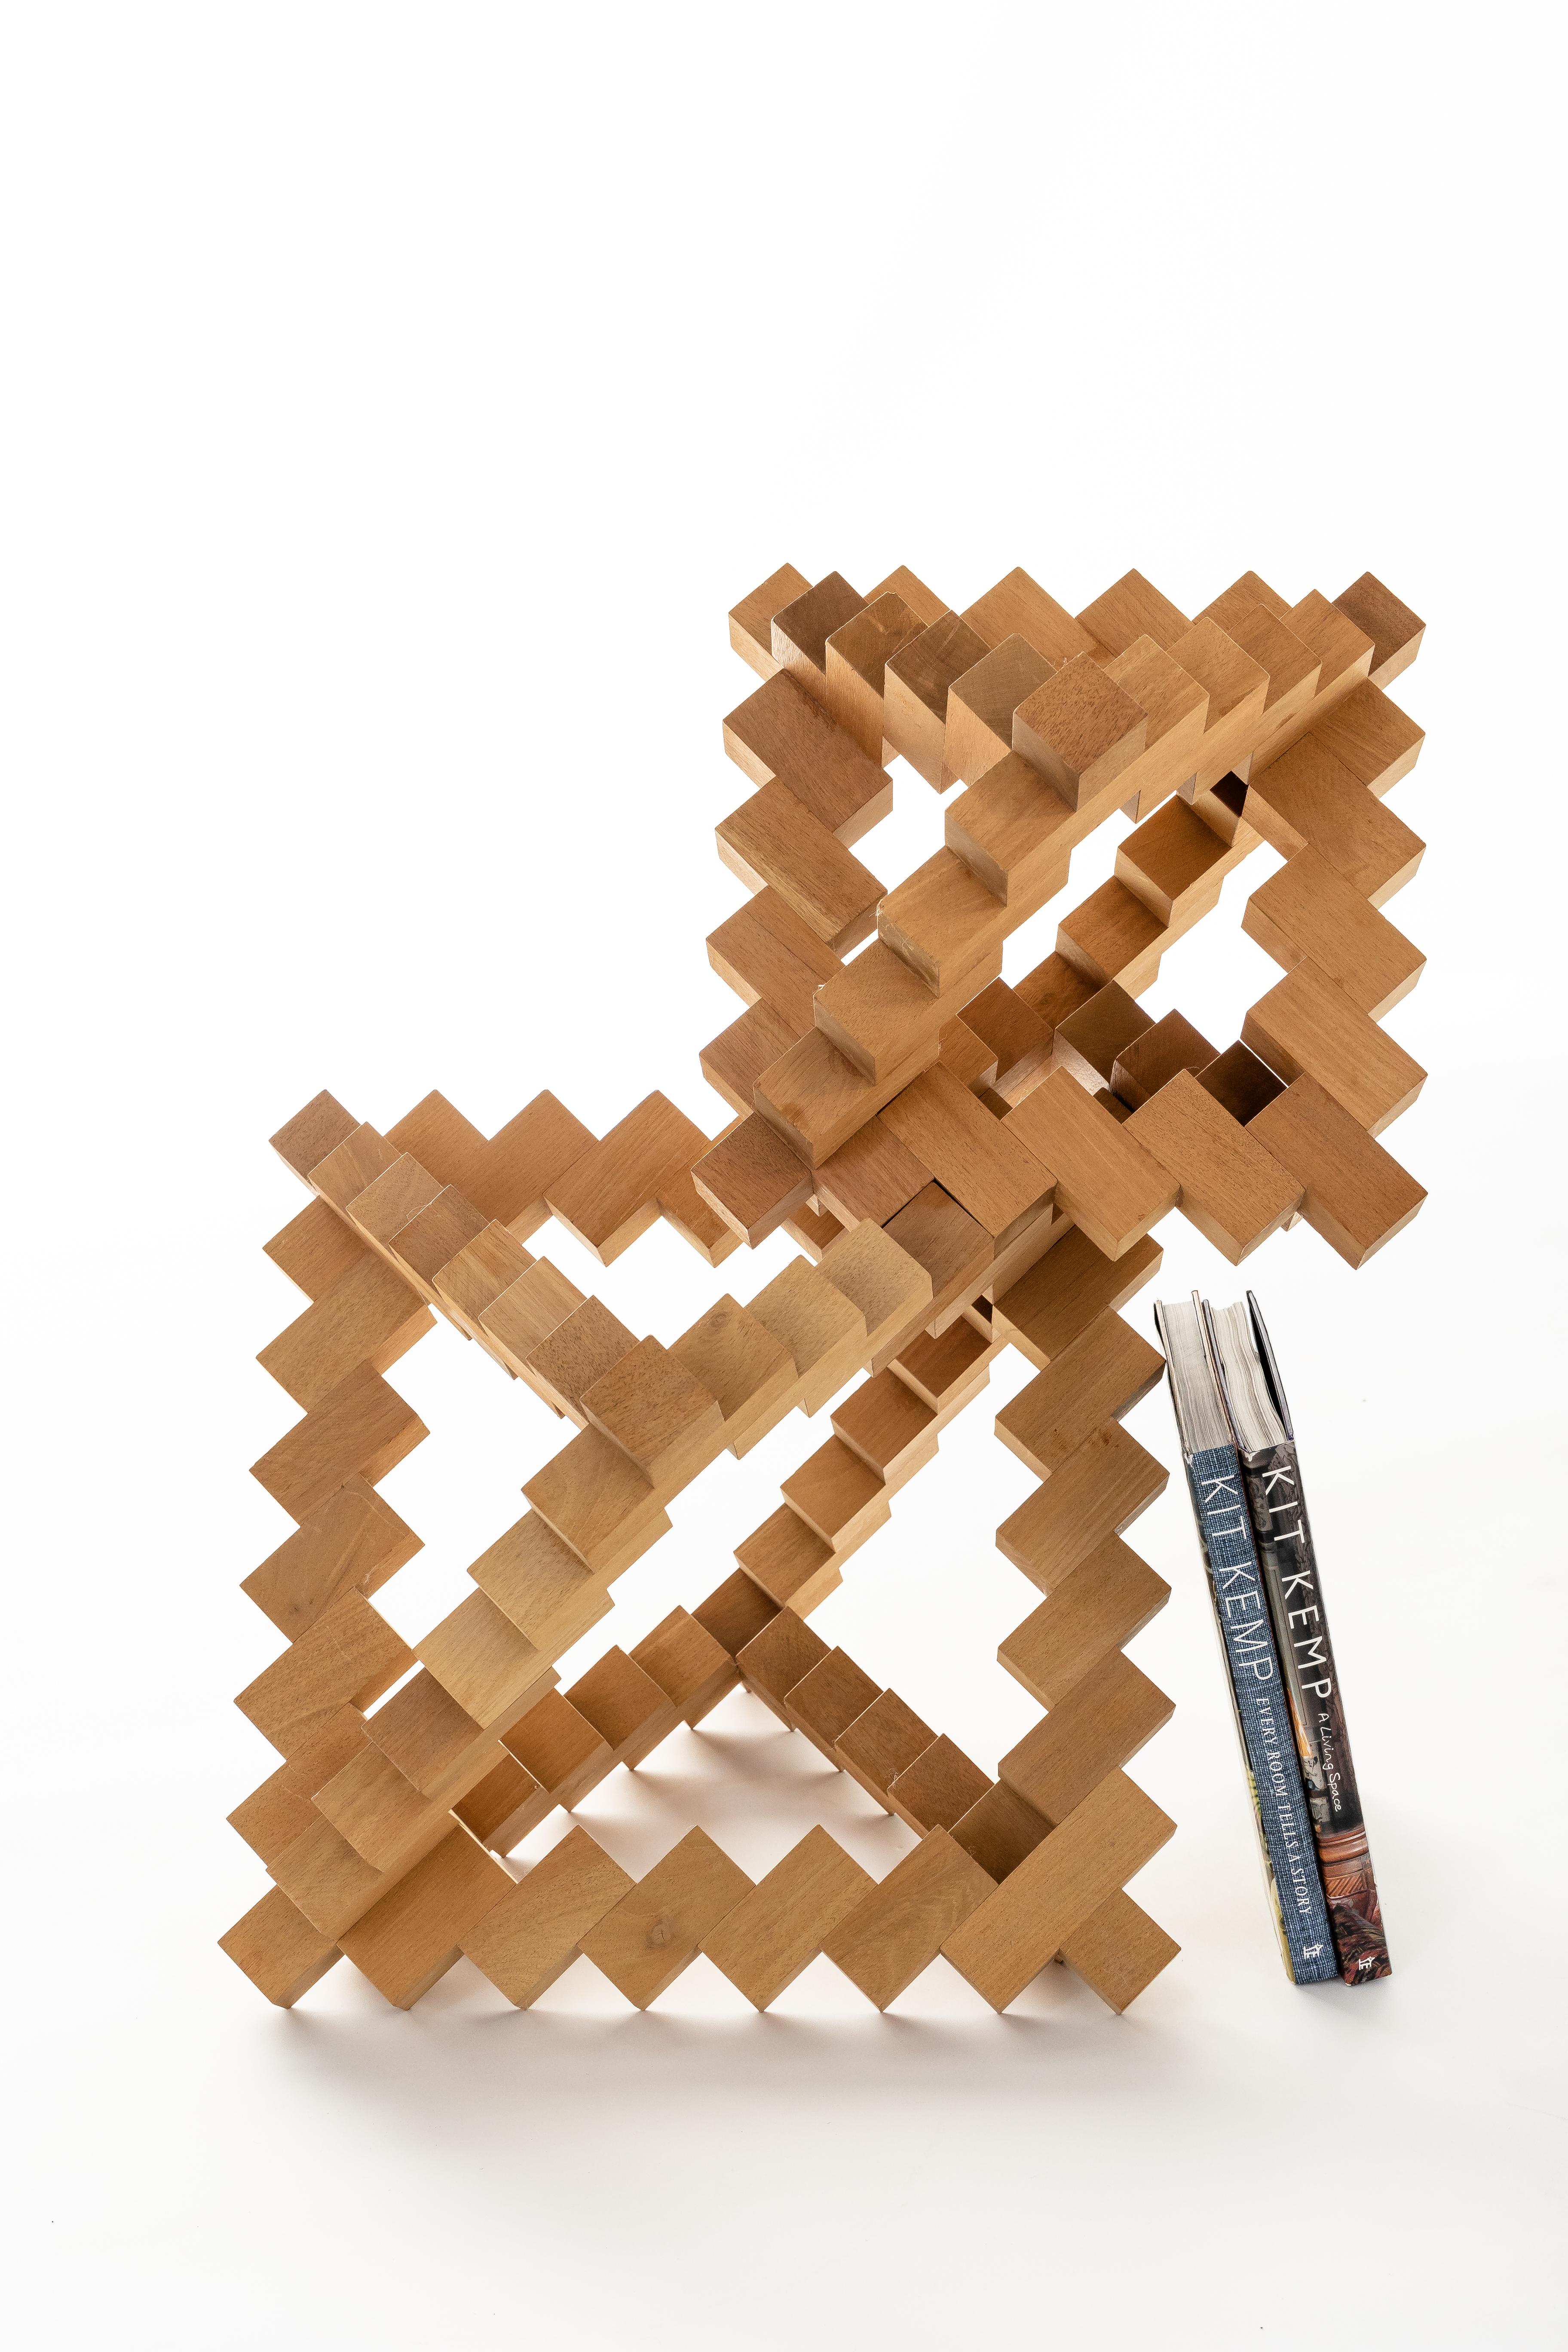 Beautiful open geometric abstract wooden sculpture made by Morton Rachofoky.

Dimensions will differ depending on configuration. 

